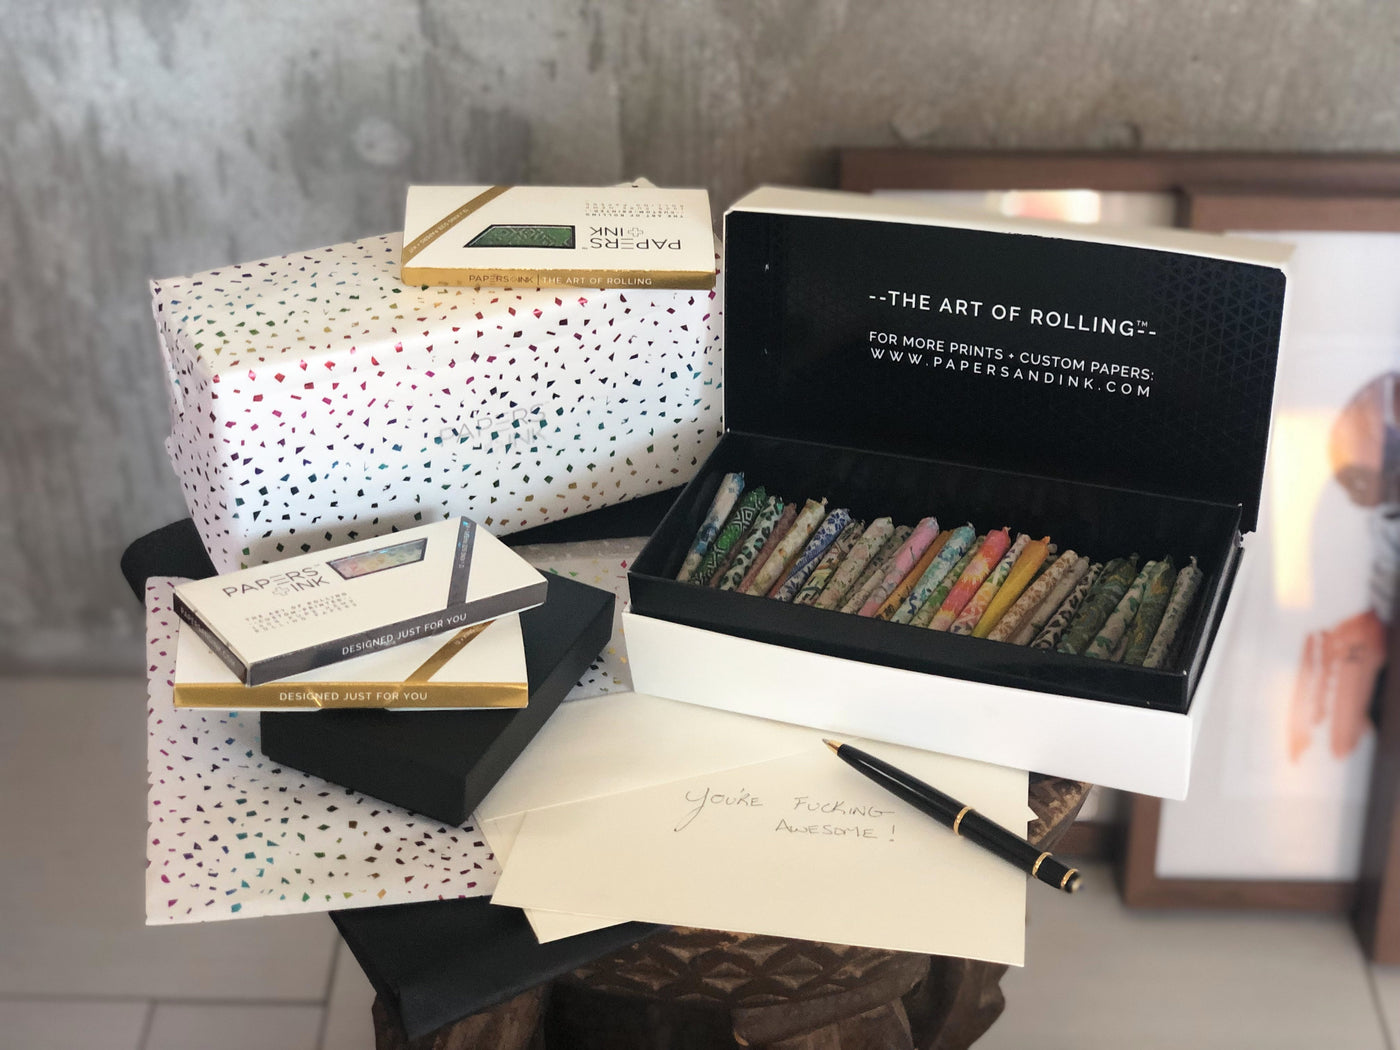 Best gift ever for your smoking friends who partake. Bundle any assortment of Papers and Ink products such as our premium hemp rolling papers kits and we'll include them in a beautiful limited edition package.